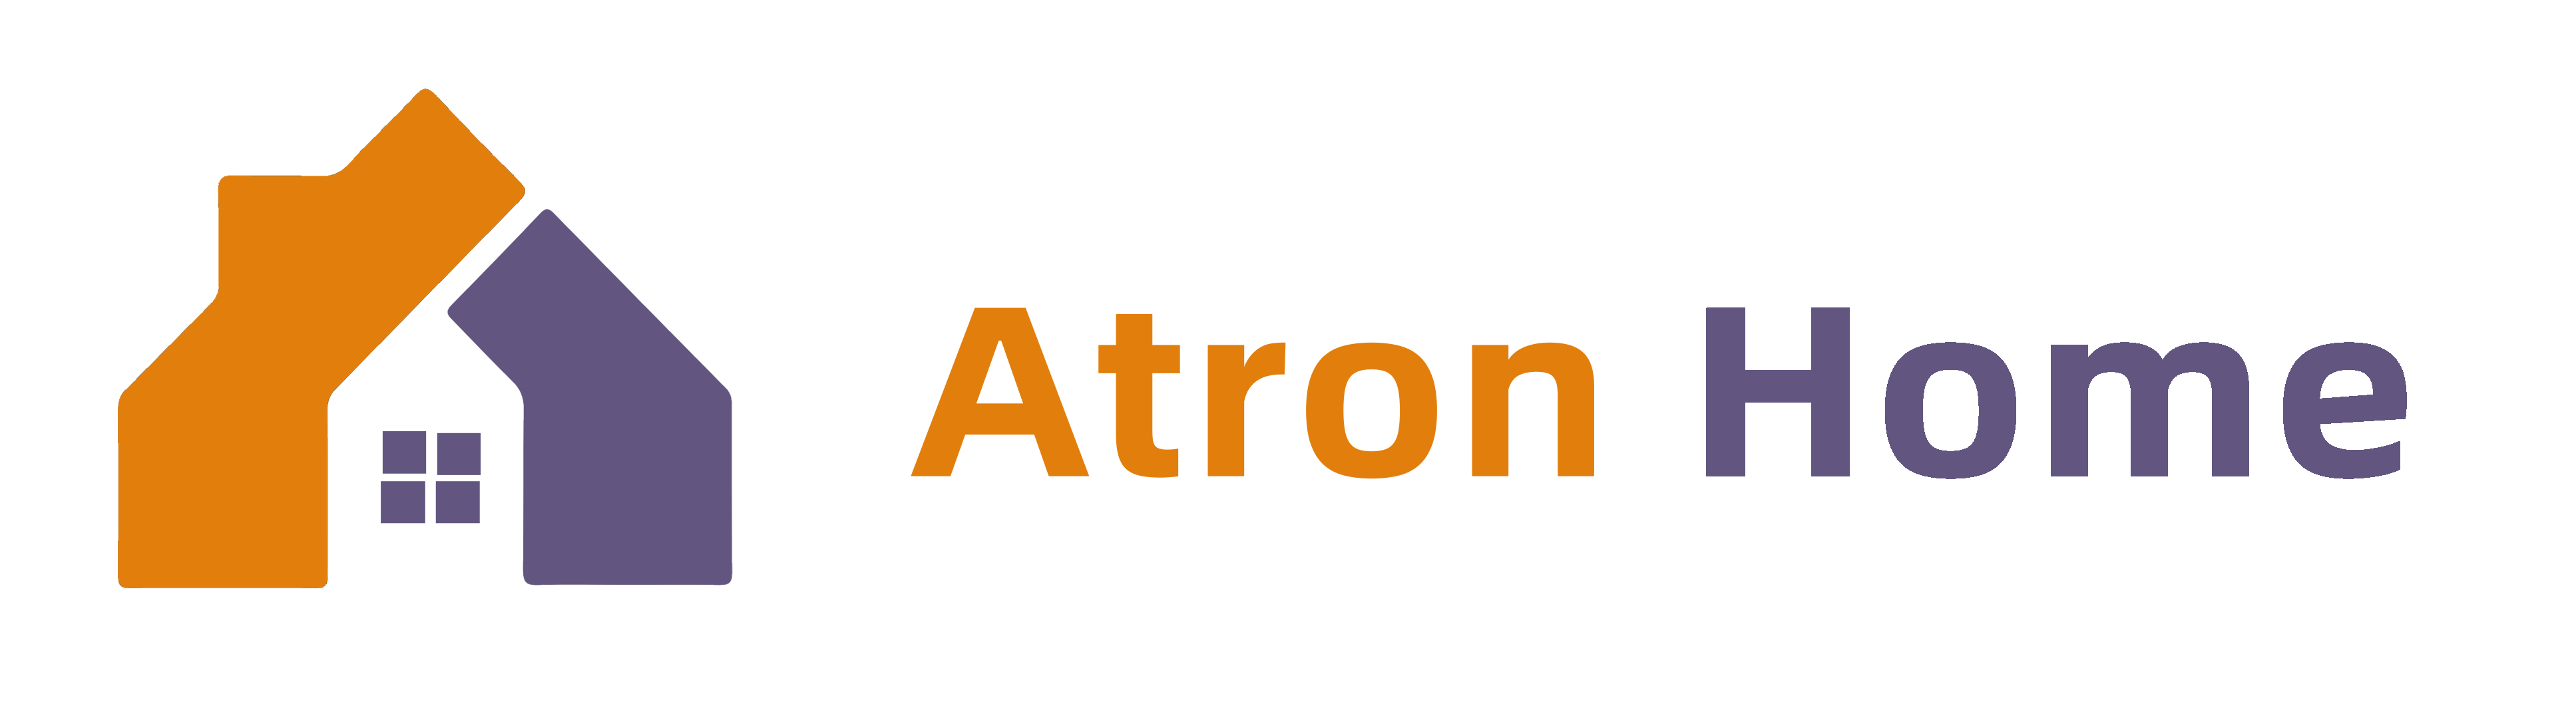 Atron Home is a Professional Wood Furniture Manufacturer